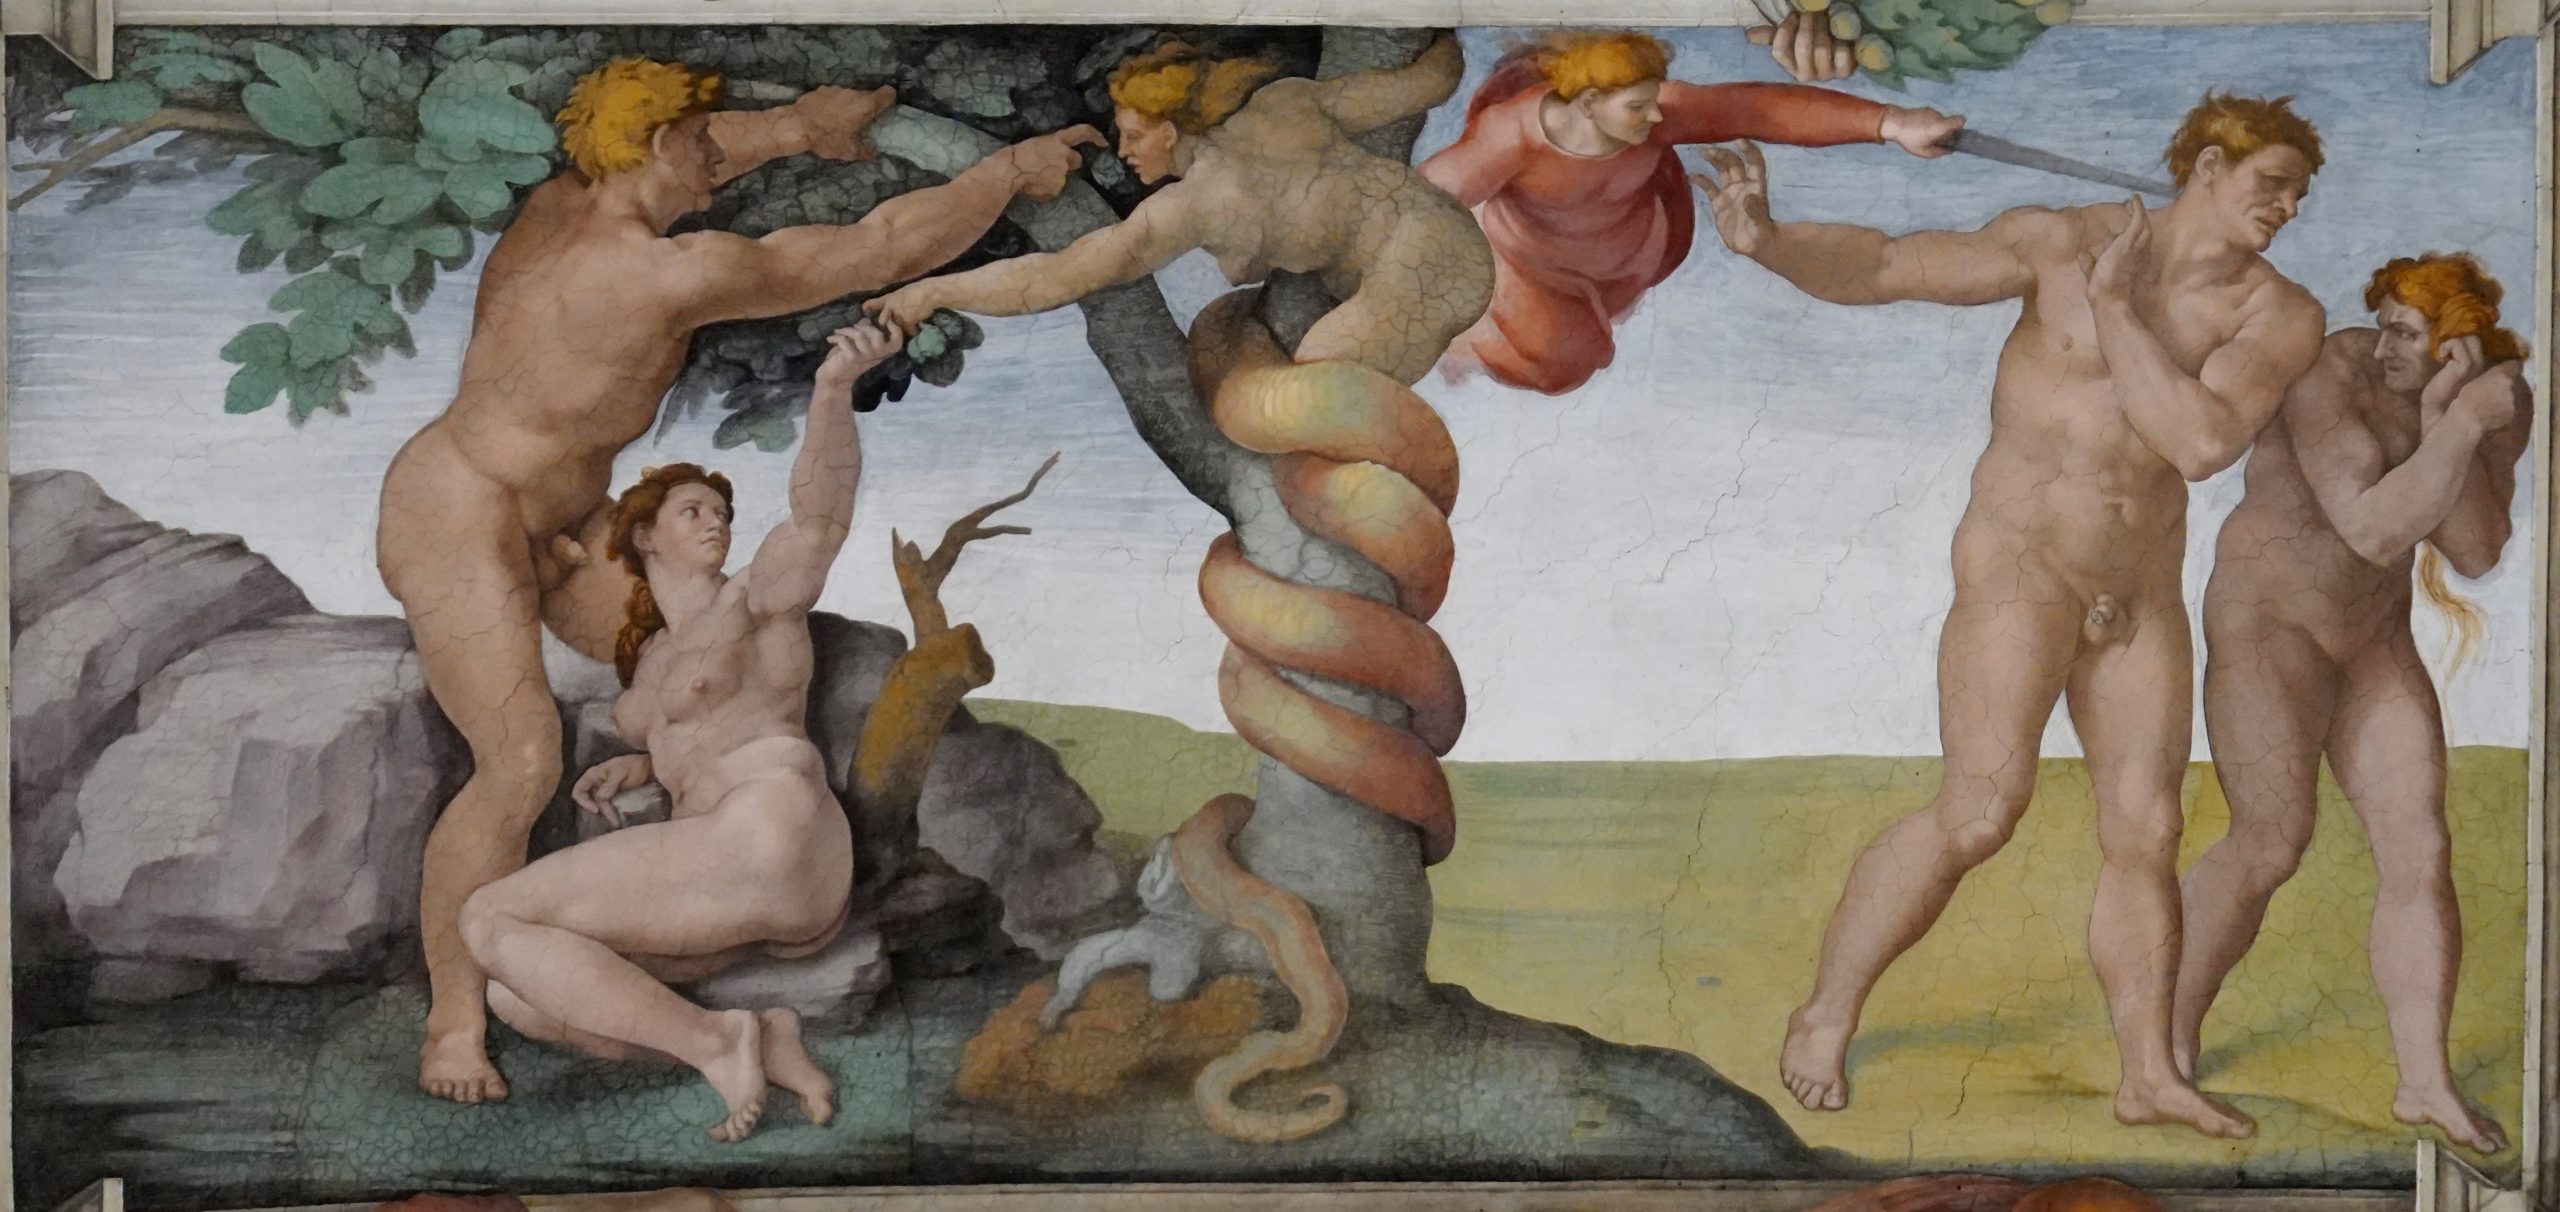 Michelangelo, The Fall and Expulsion from the Garden of Eden, Ceiling of the Sistine Chapel, fresco, 1508-12 (Vatican City, Rome). Photo by Richard Mortel, CC BY 2.0.